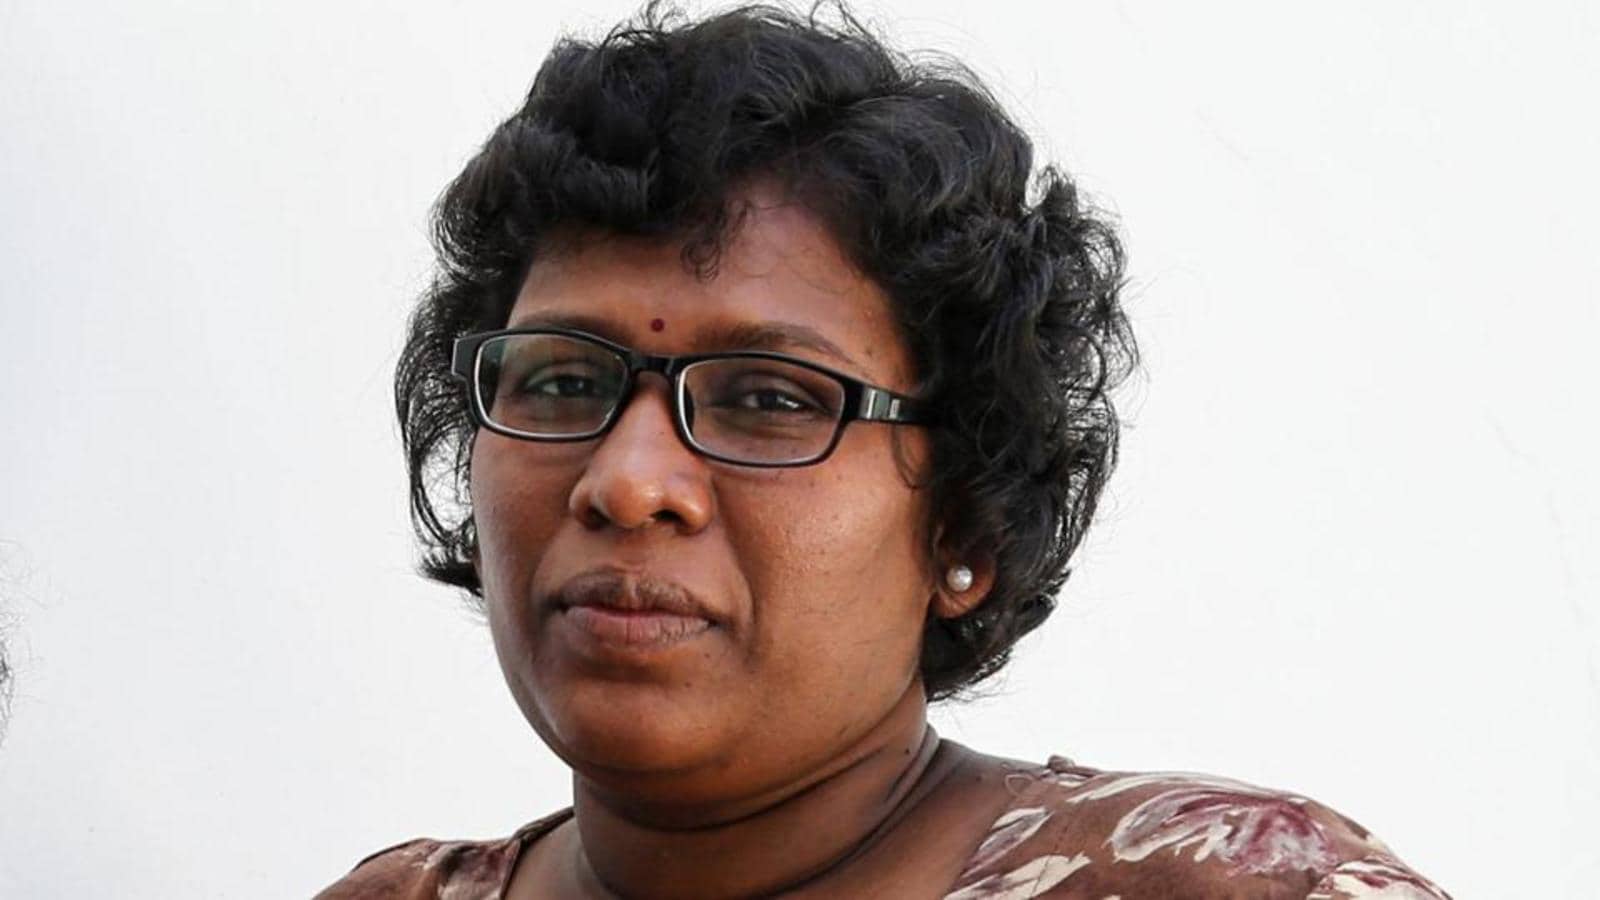 bindhu ammini, the first women to enter sabarimala was attacked